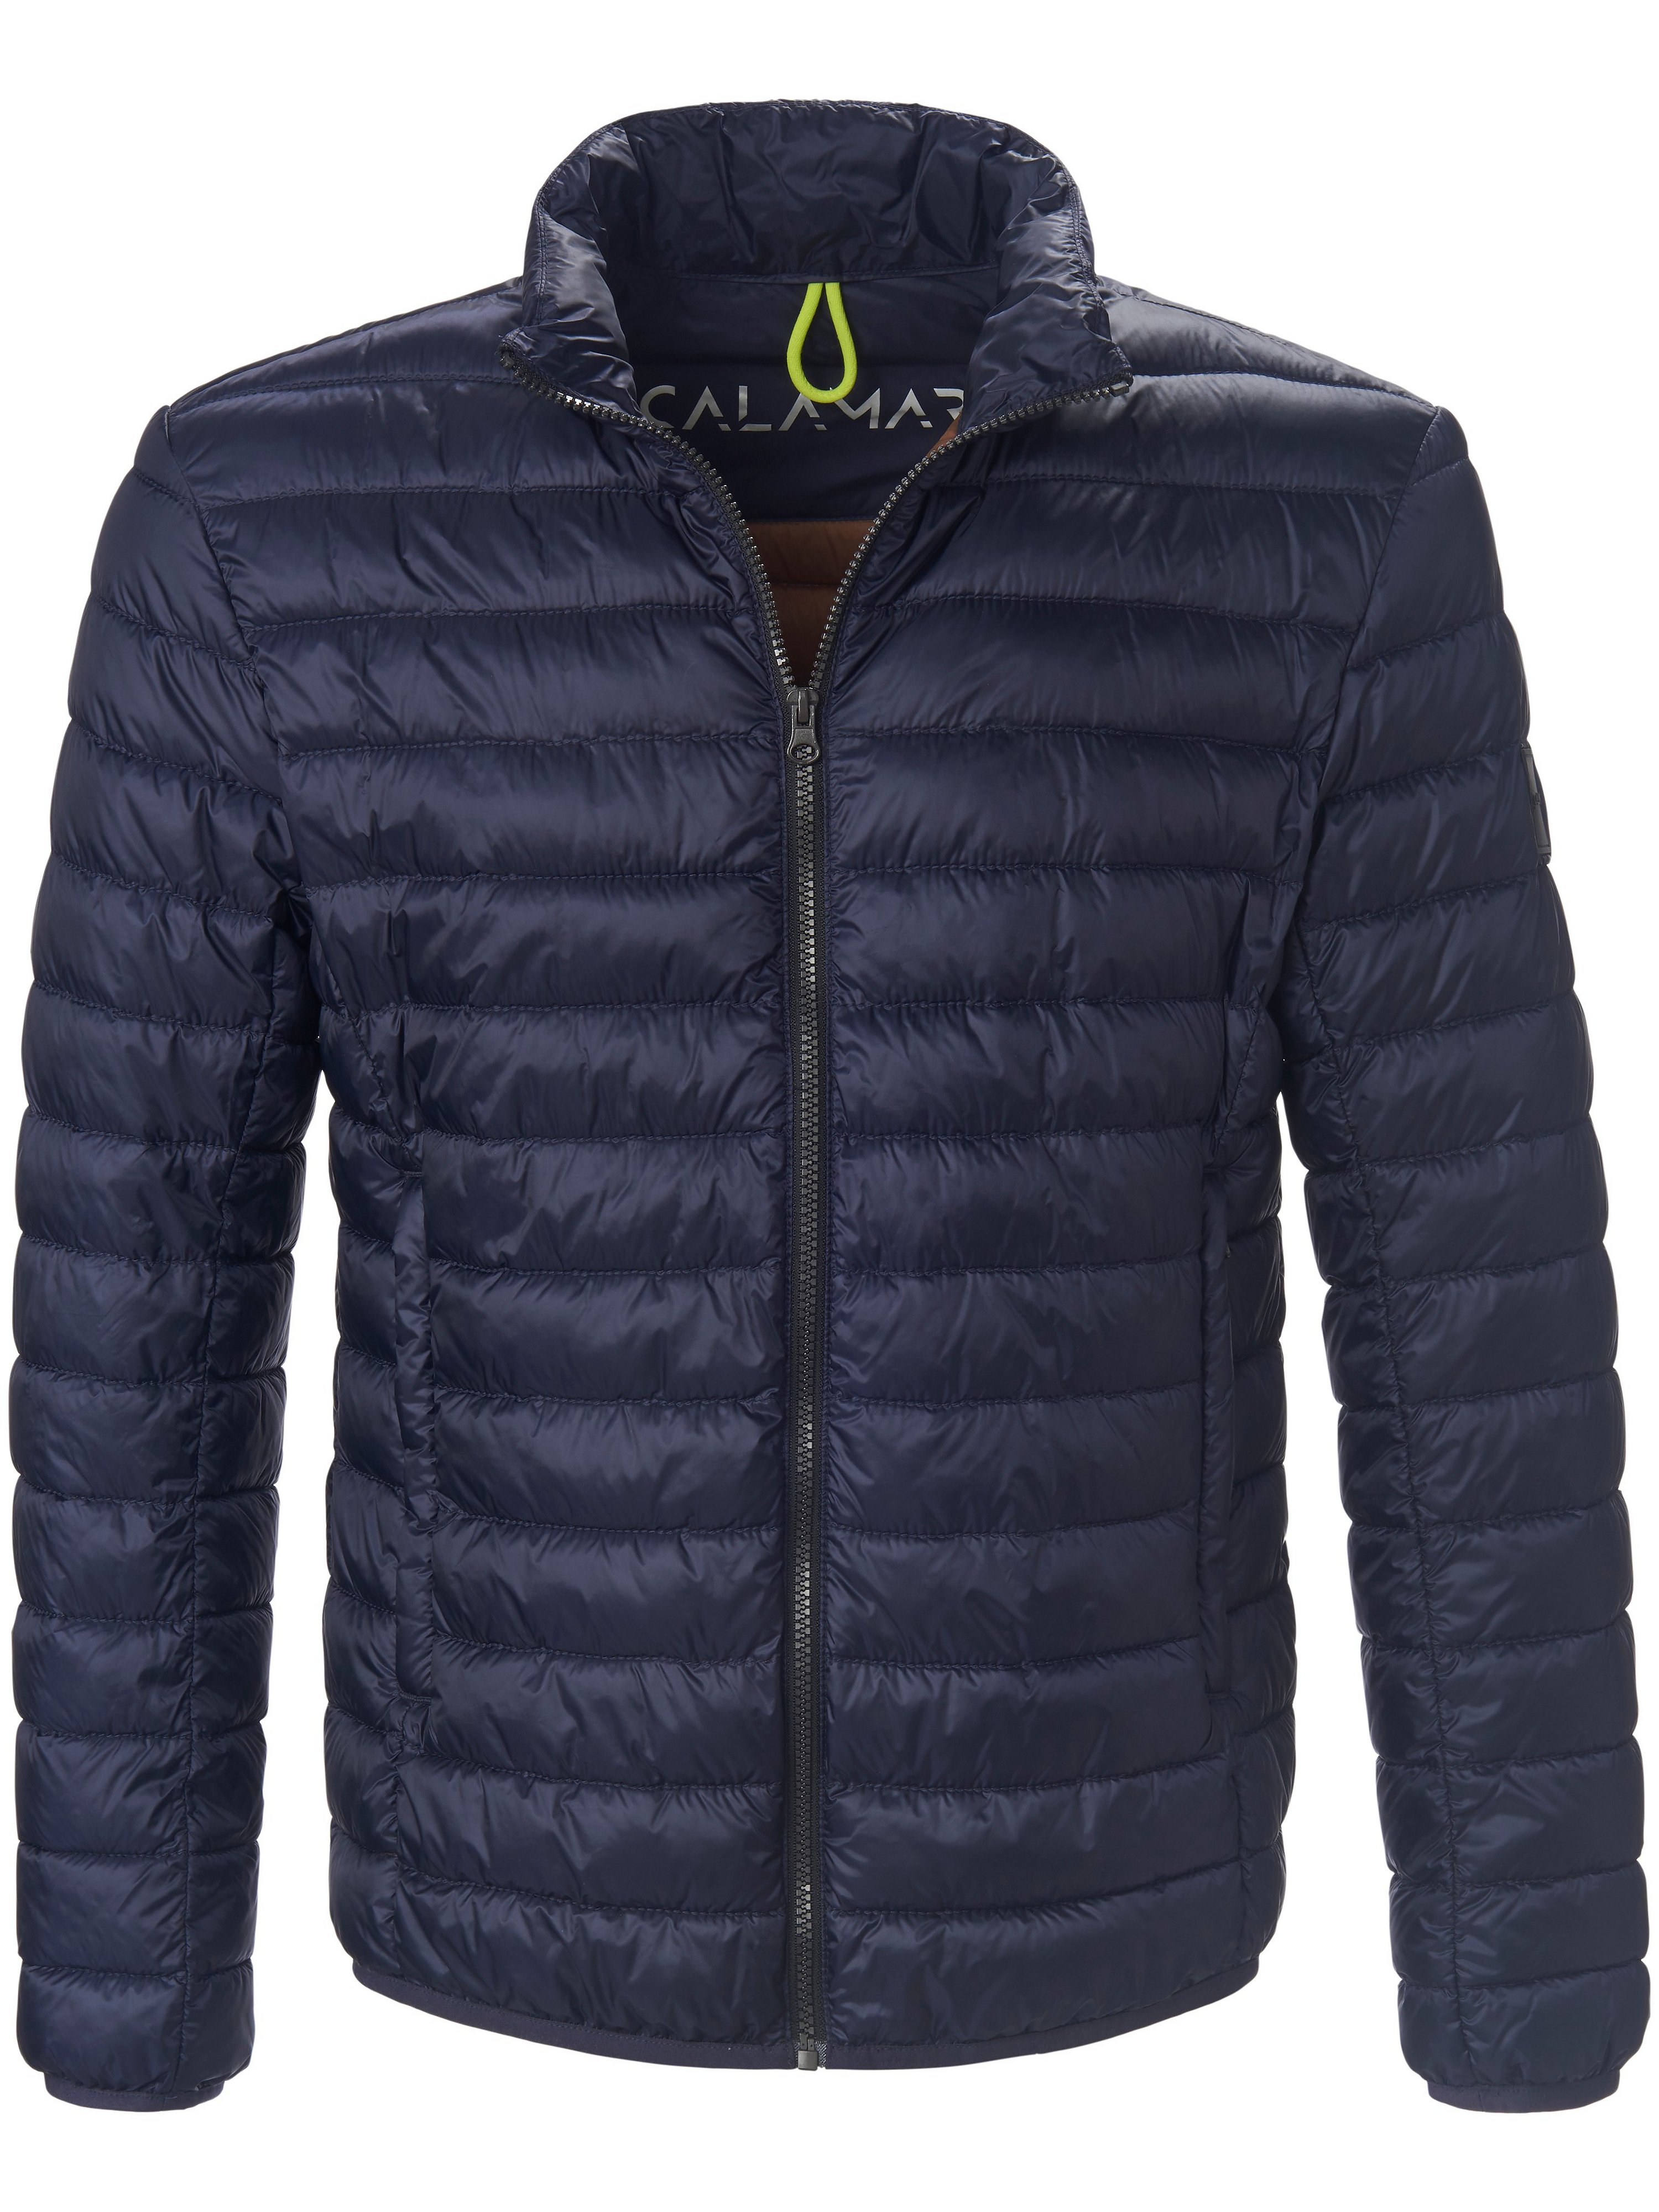 Quilted jacket CALAMAR blue